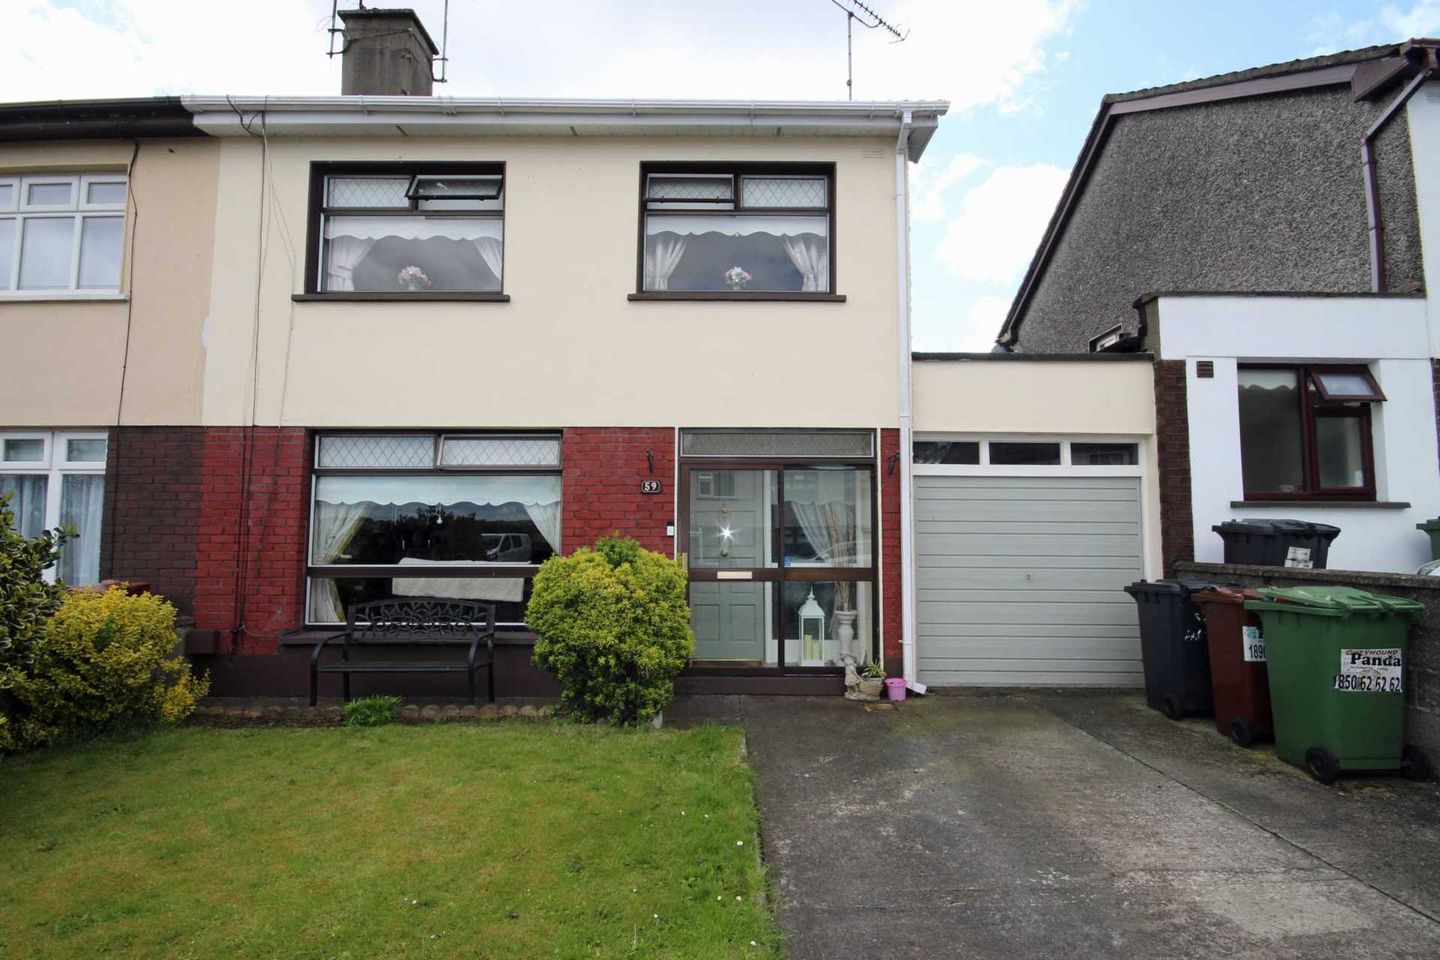 59 Hillview, Drogheda, Co. Louth